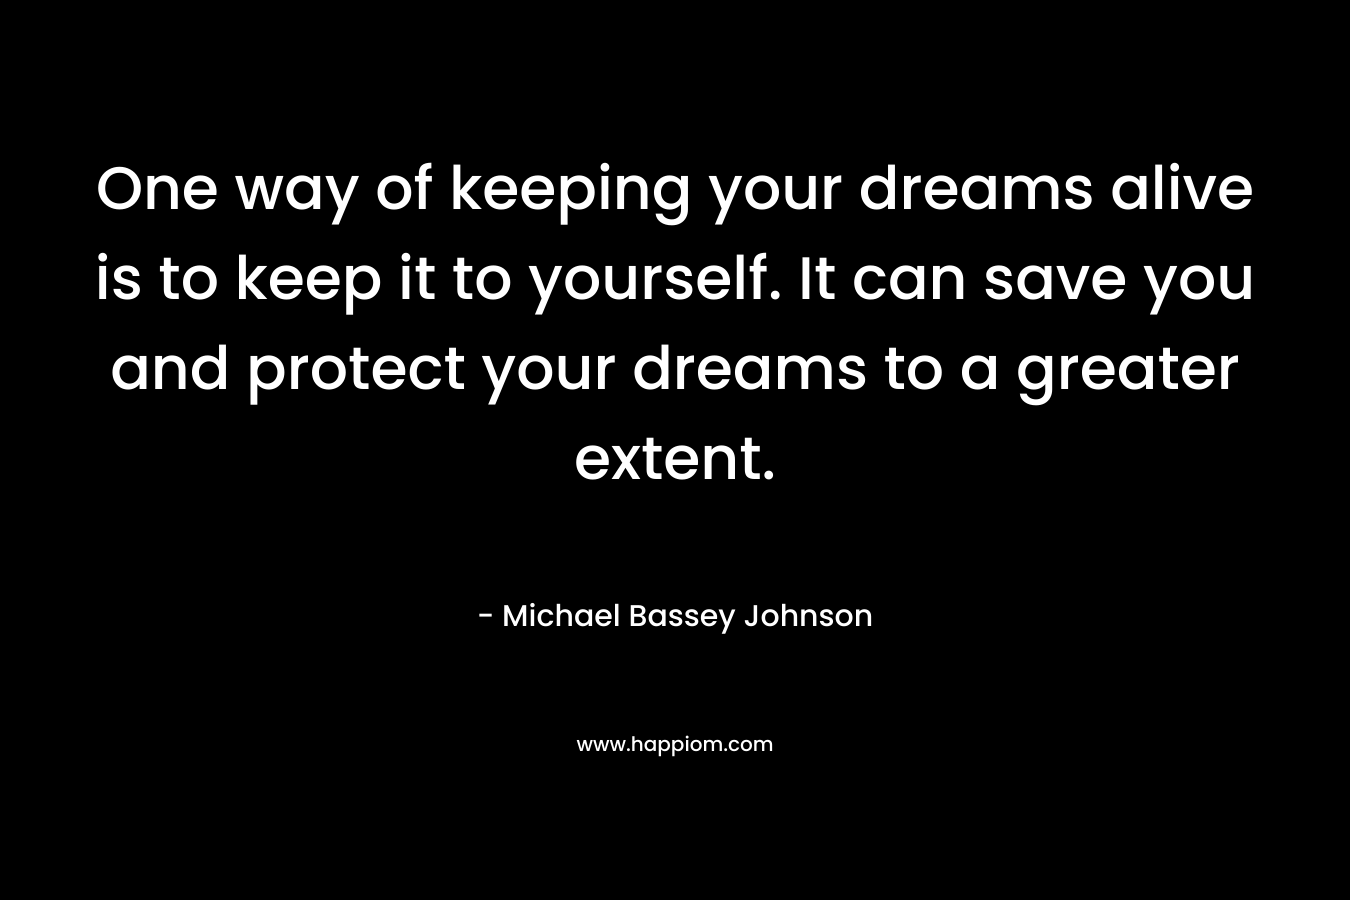 One way of keeping your dreams alive is to keep it to yourself. It can save you and protect your dreams to a greater extent.